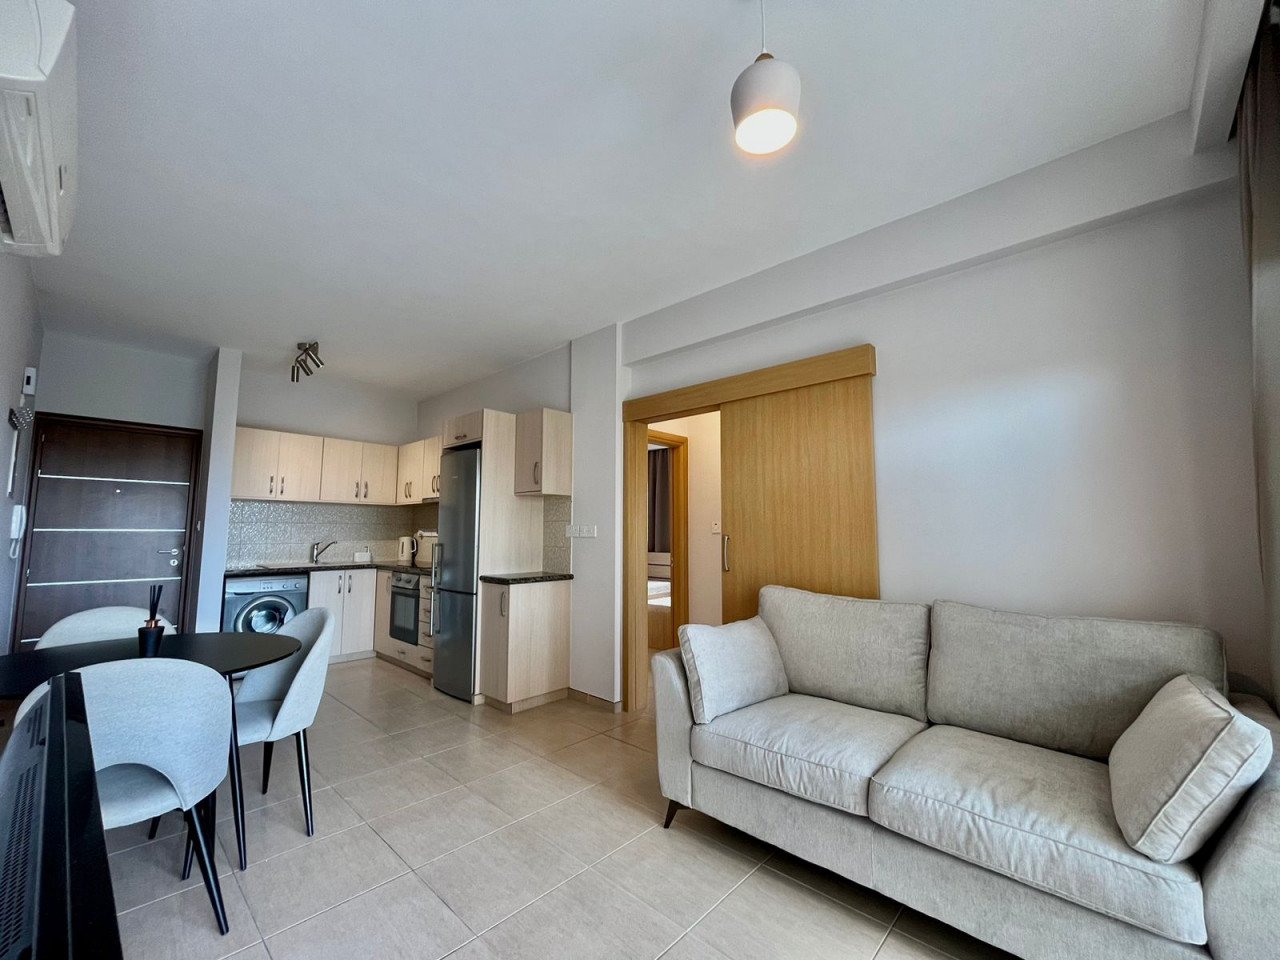 Property for Rent: Apartment (Flat) in Park Lane Area, Limassol for Rent | Key Realtor Cyprus